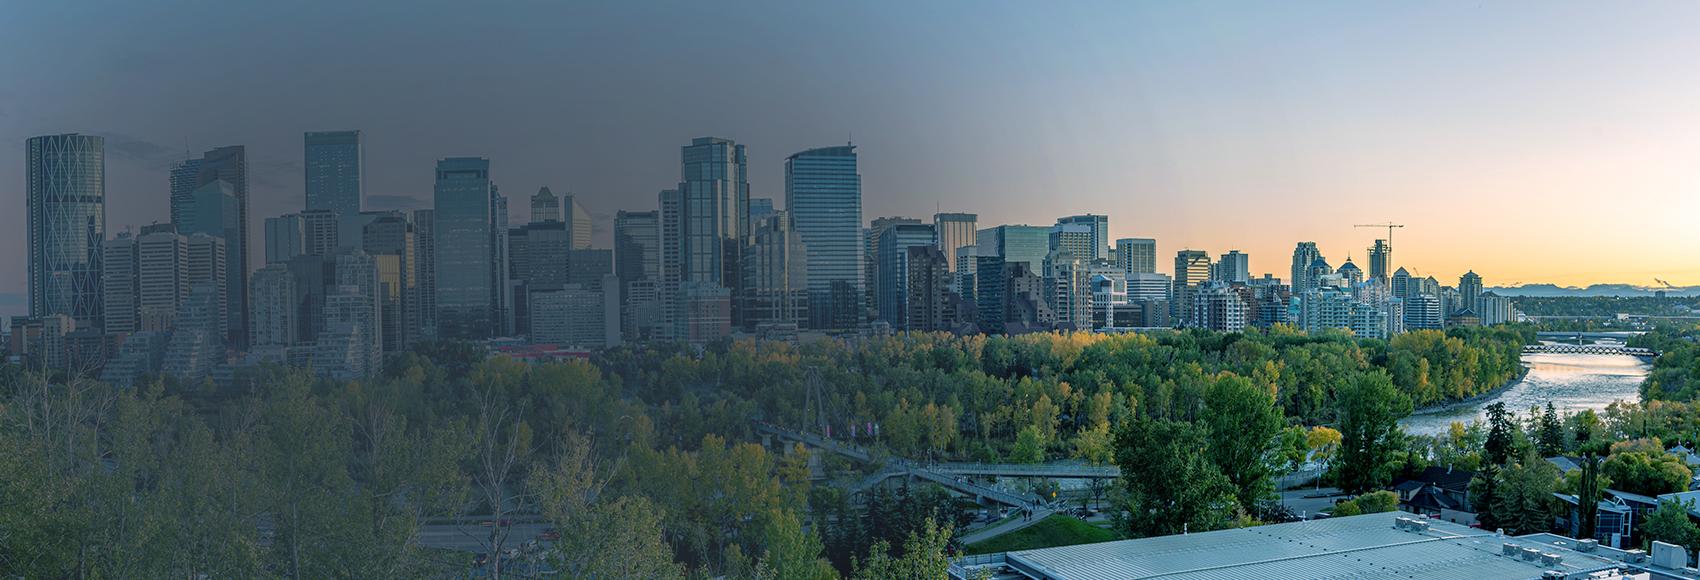 View of Calgary's Landscape